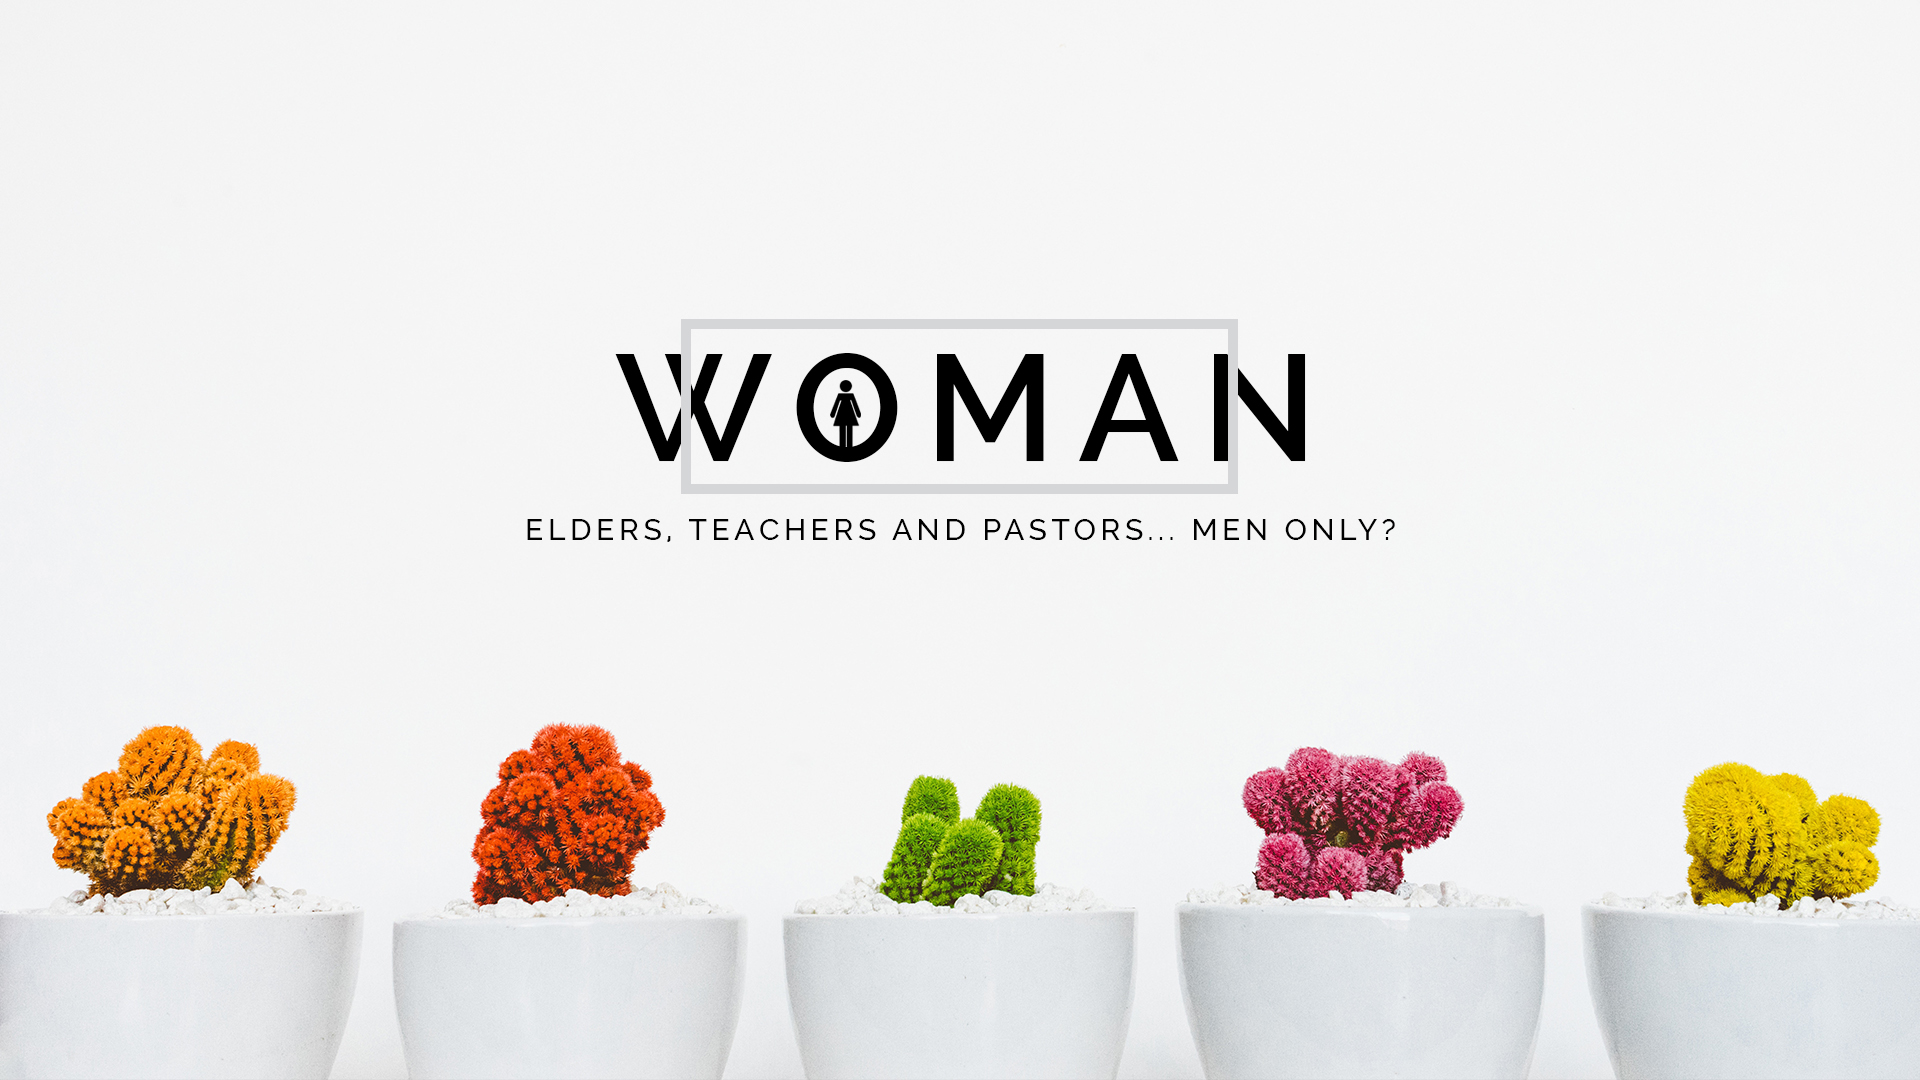 WOMAN - Submission and Headship, what’s that all about?